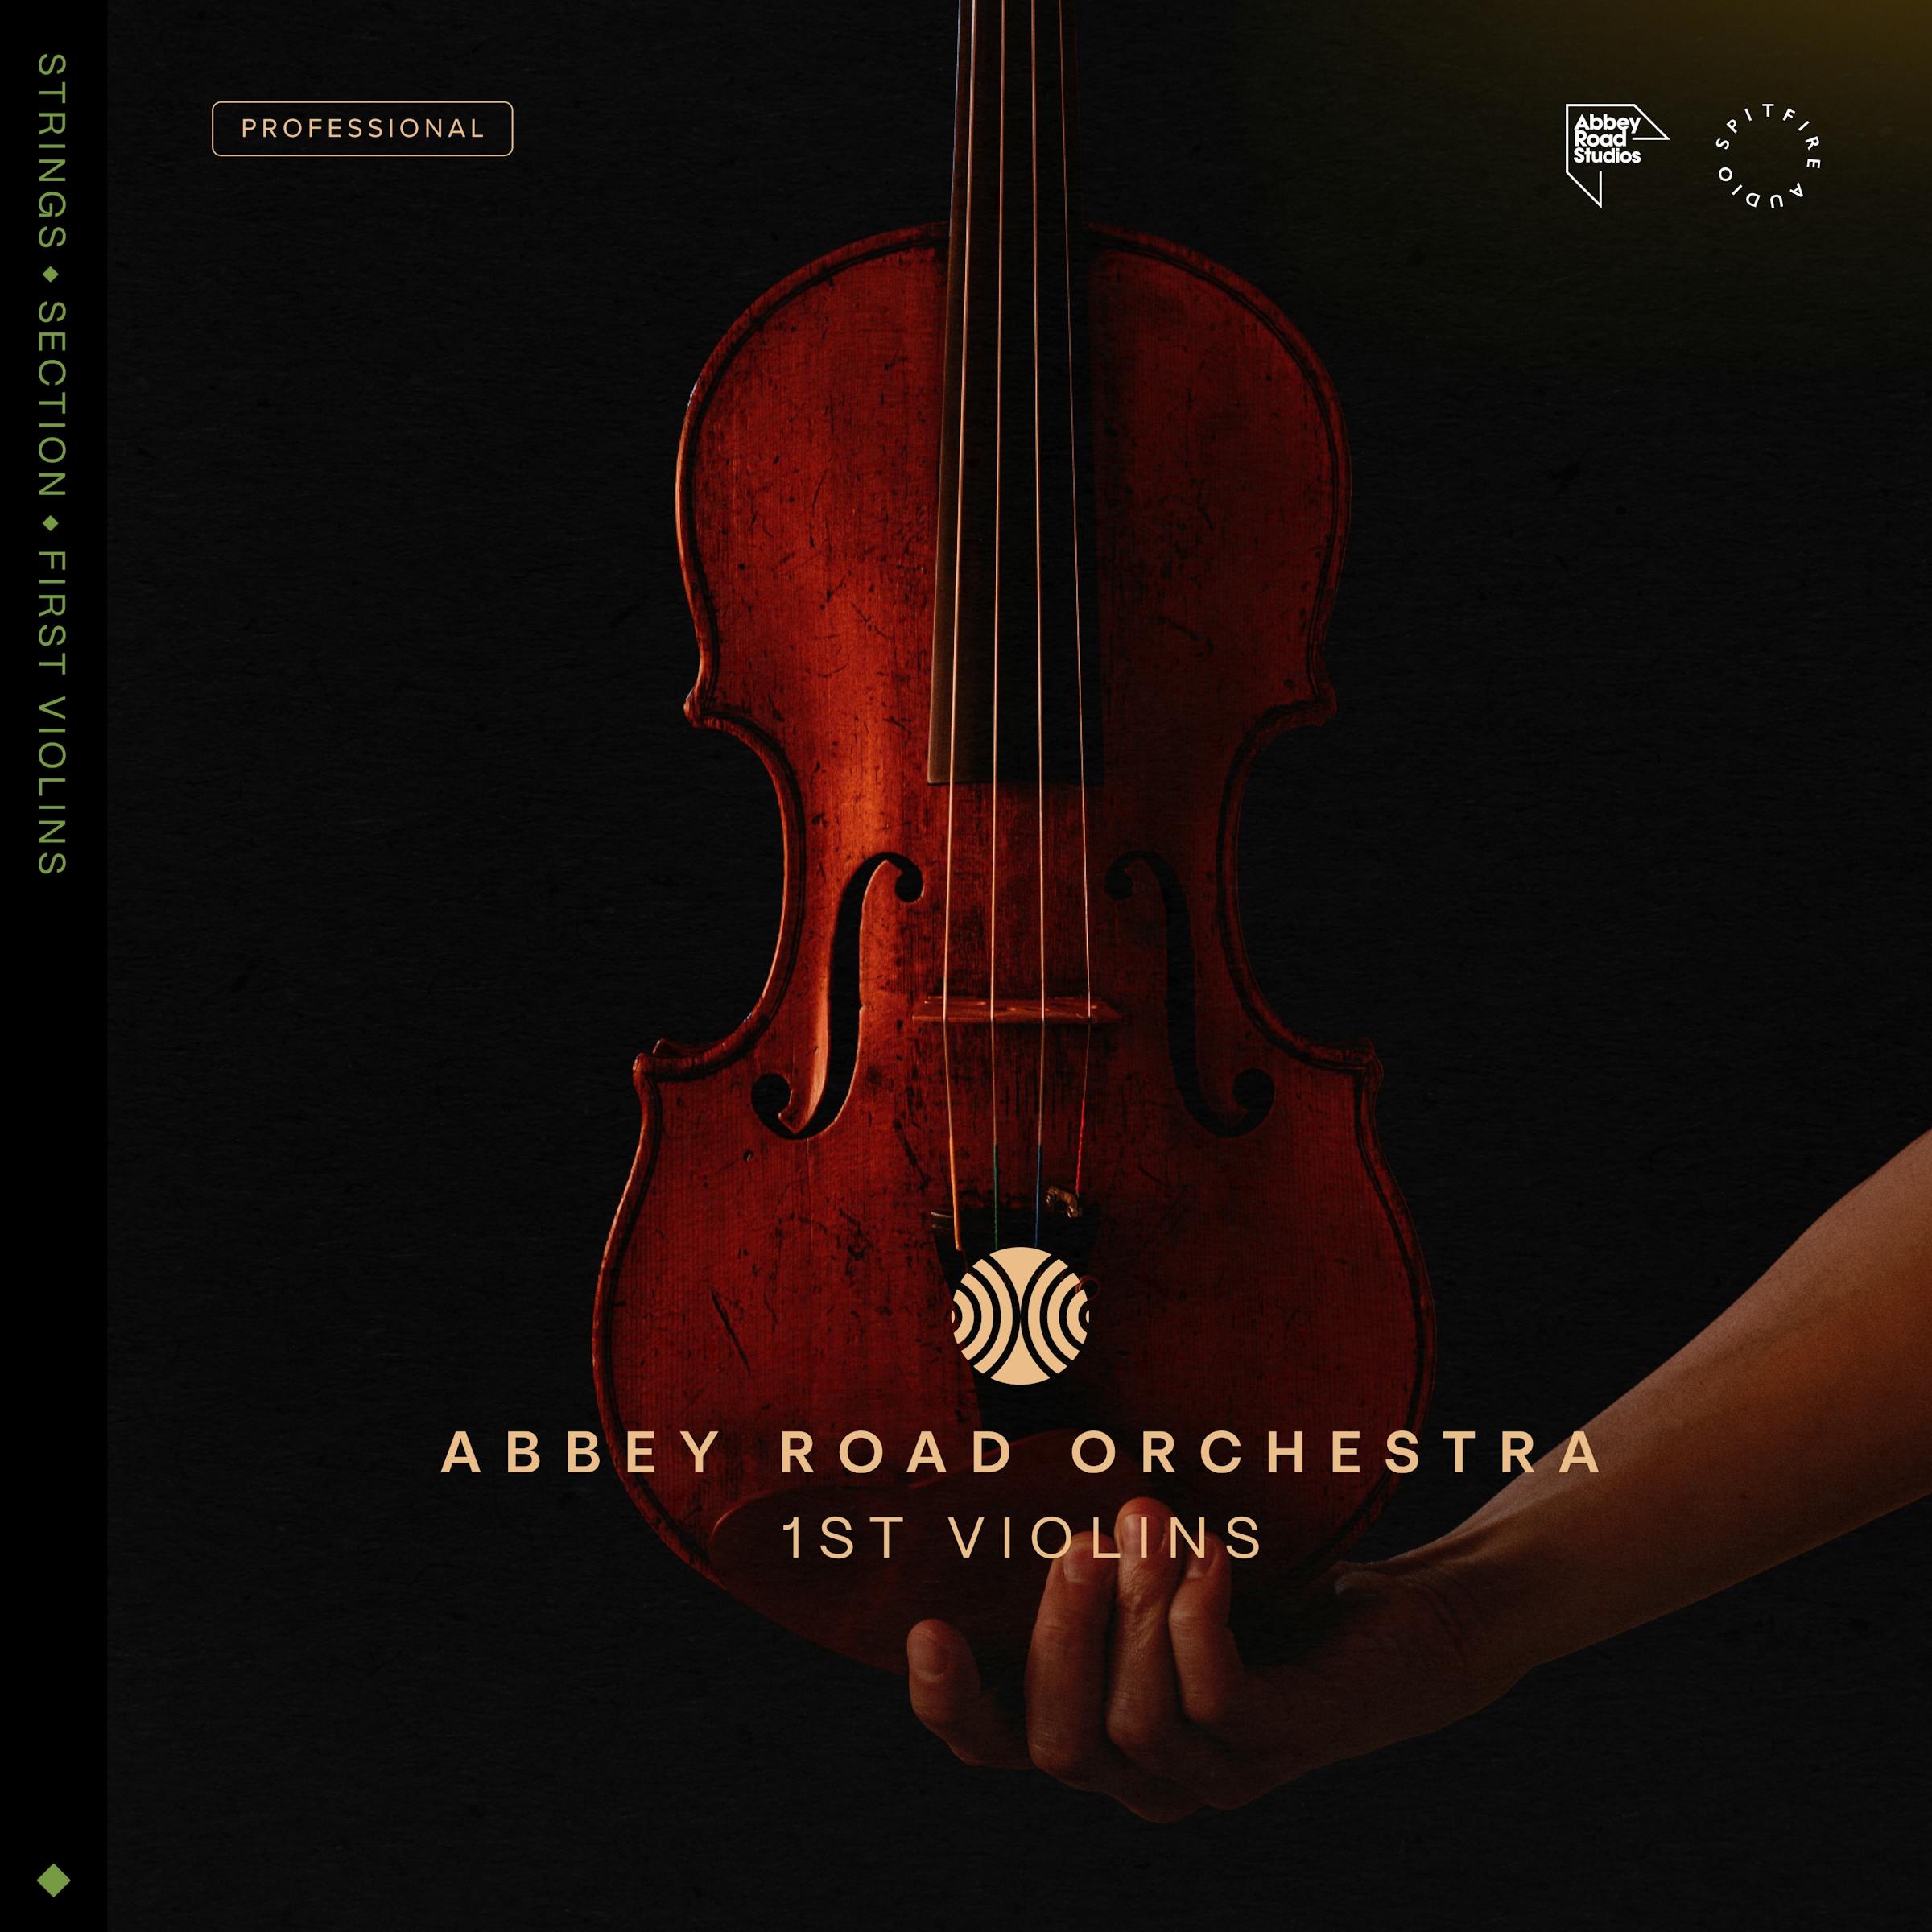 Abbey Road Orchestra: 1st Violins Professional artwork. A hand holding up a violin over a black background.